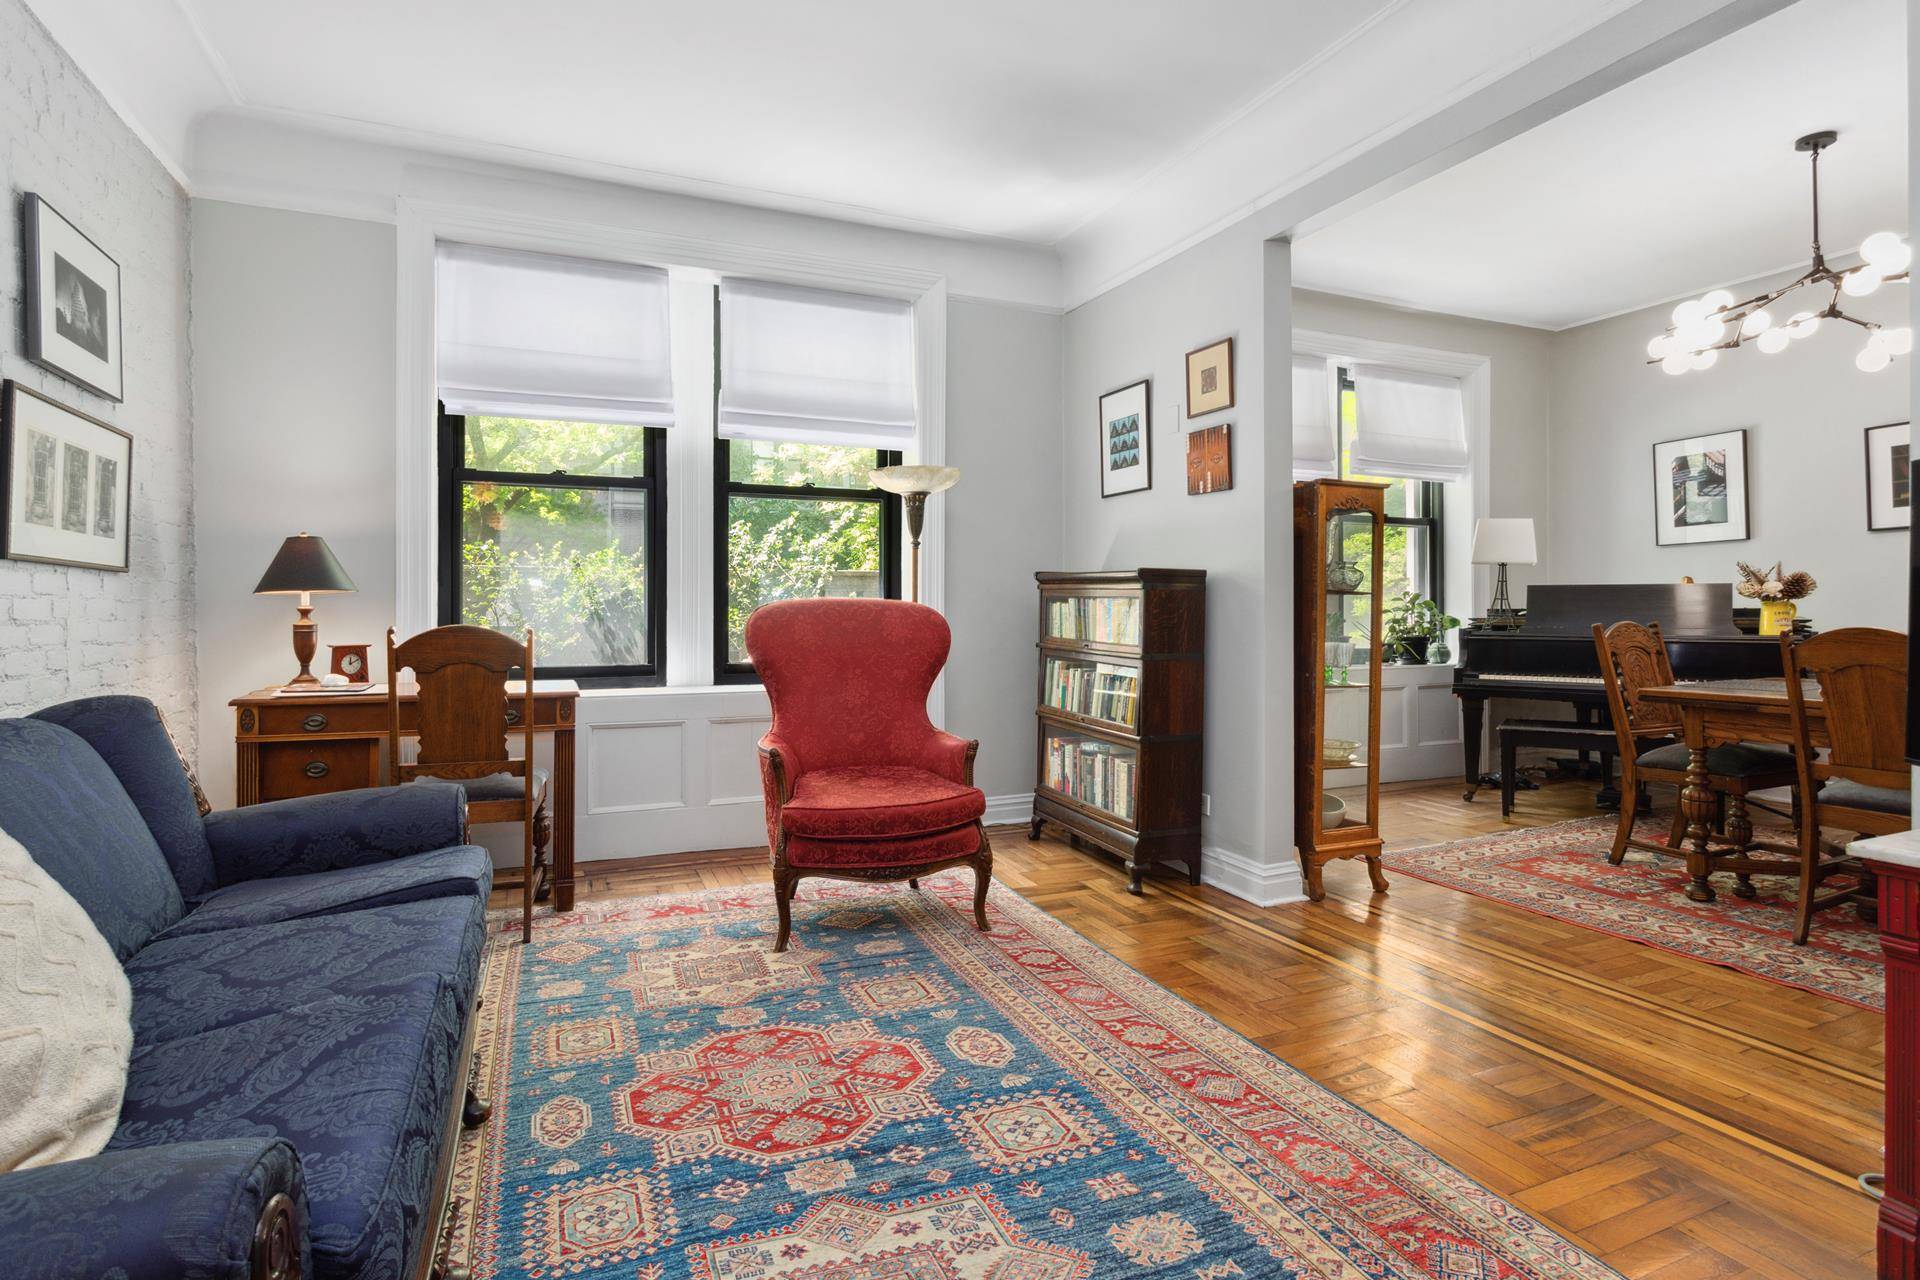 Charming two bedroom, two bath apartment with soaring ceilings and pre war details throughout, located in a historic prewar beaux arts Carnegie Hill boutique co op.